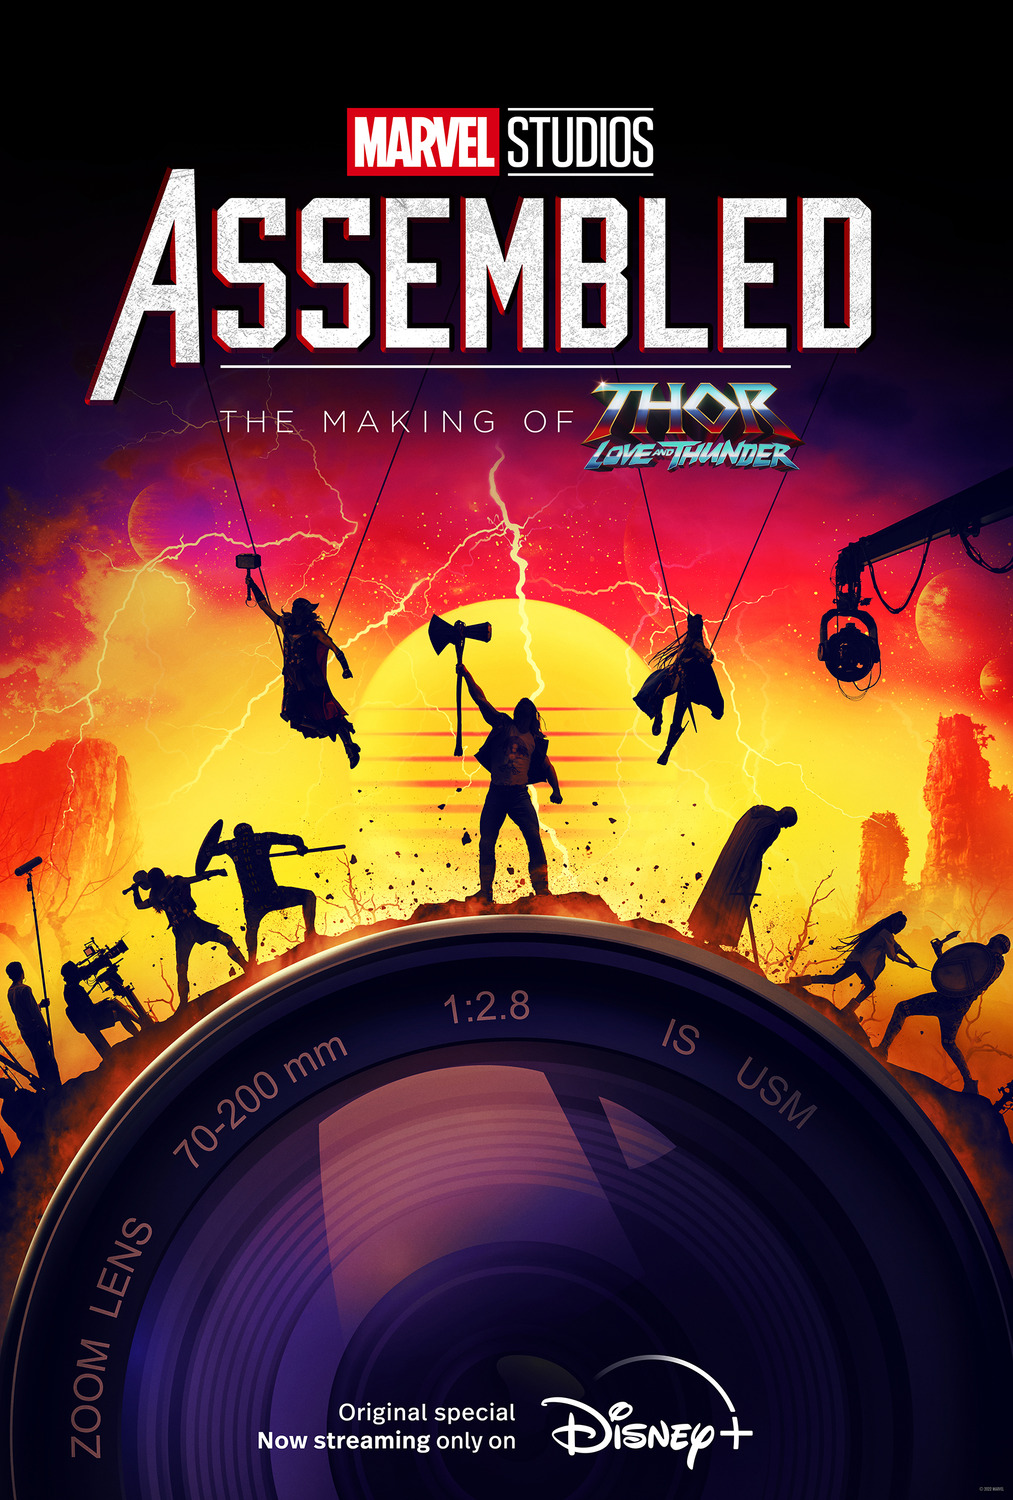 Extra Large Movie Poster Image for Marvel Studios: Assembled (#12 of 13)